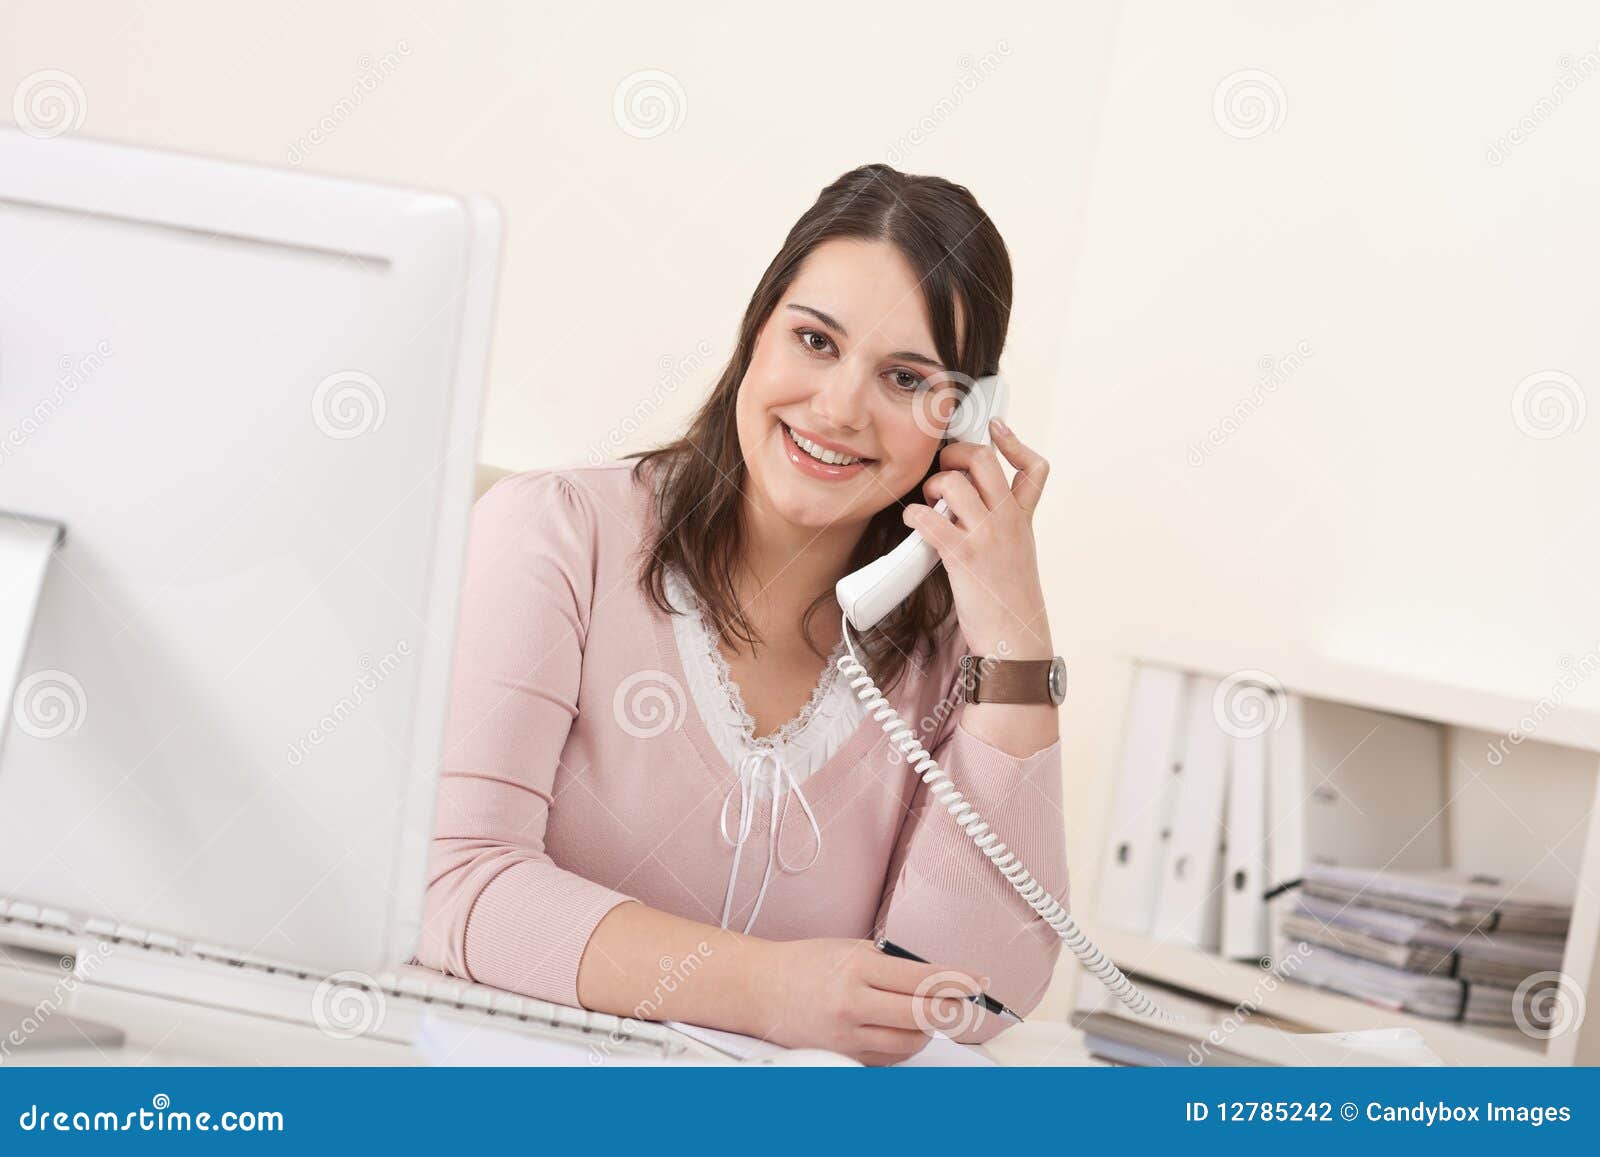 young secretary on phone at modern office